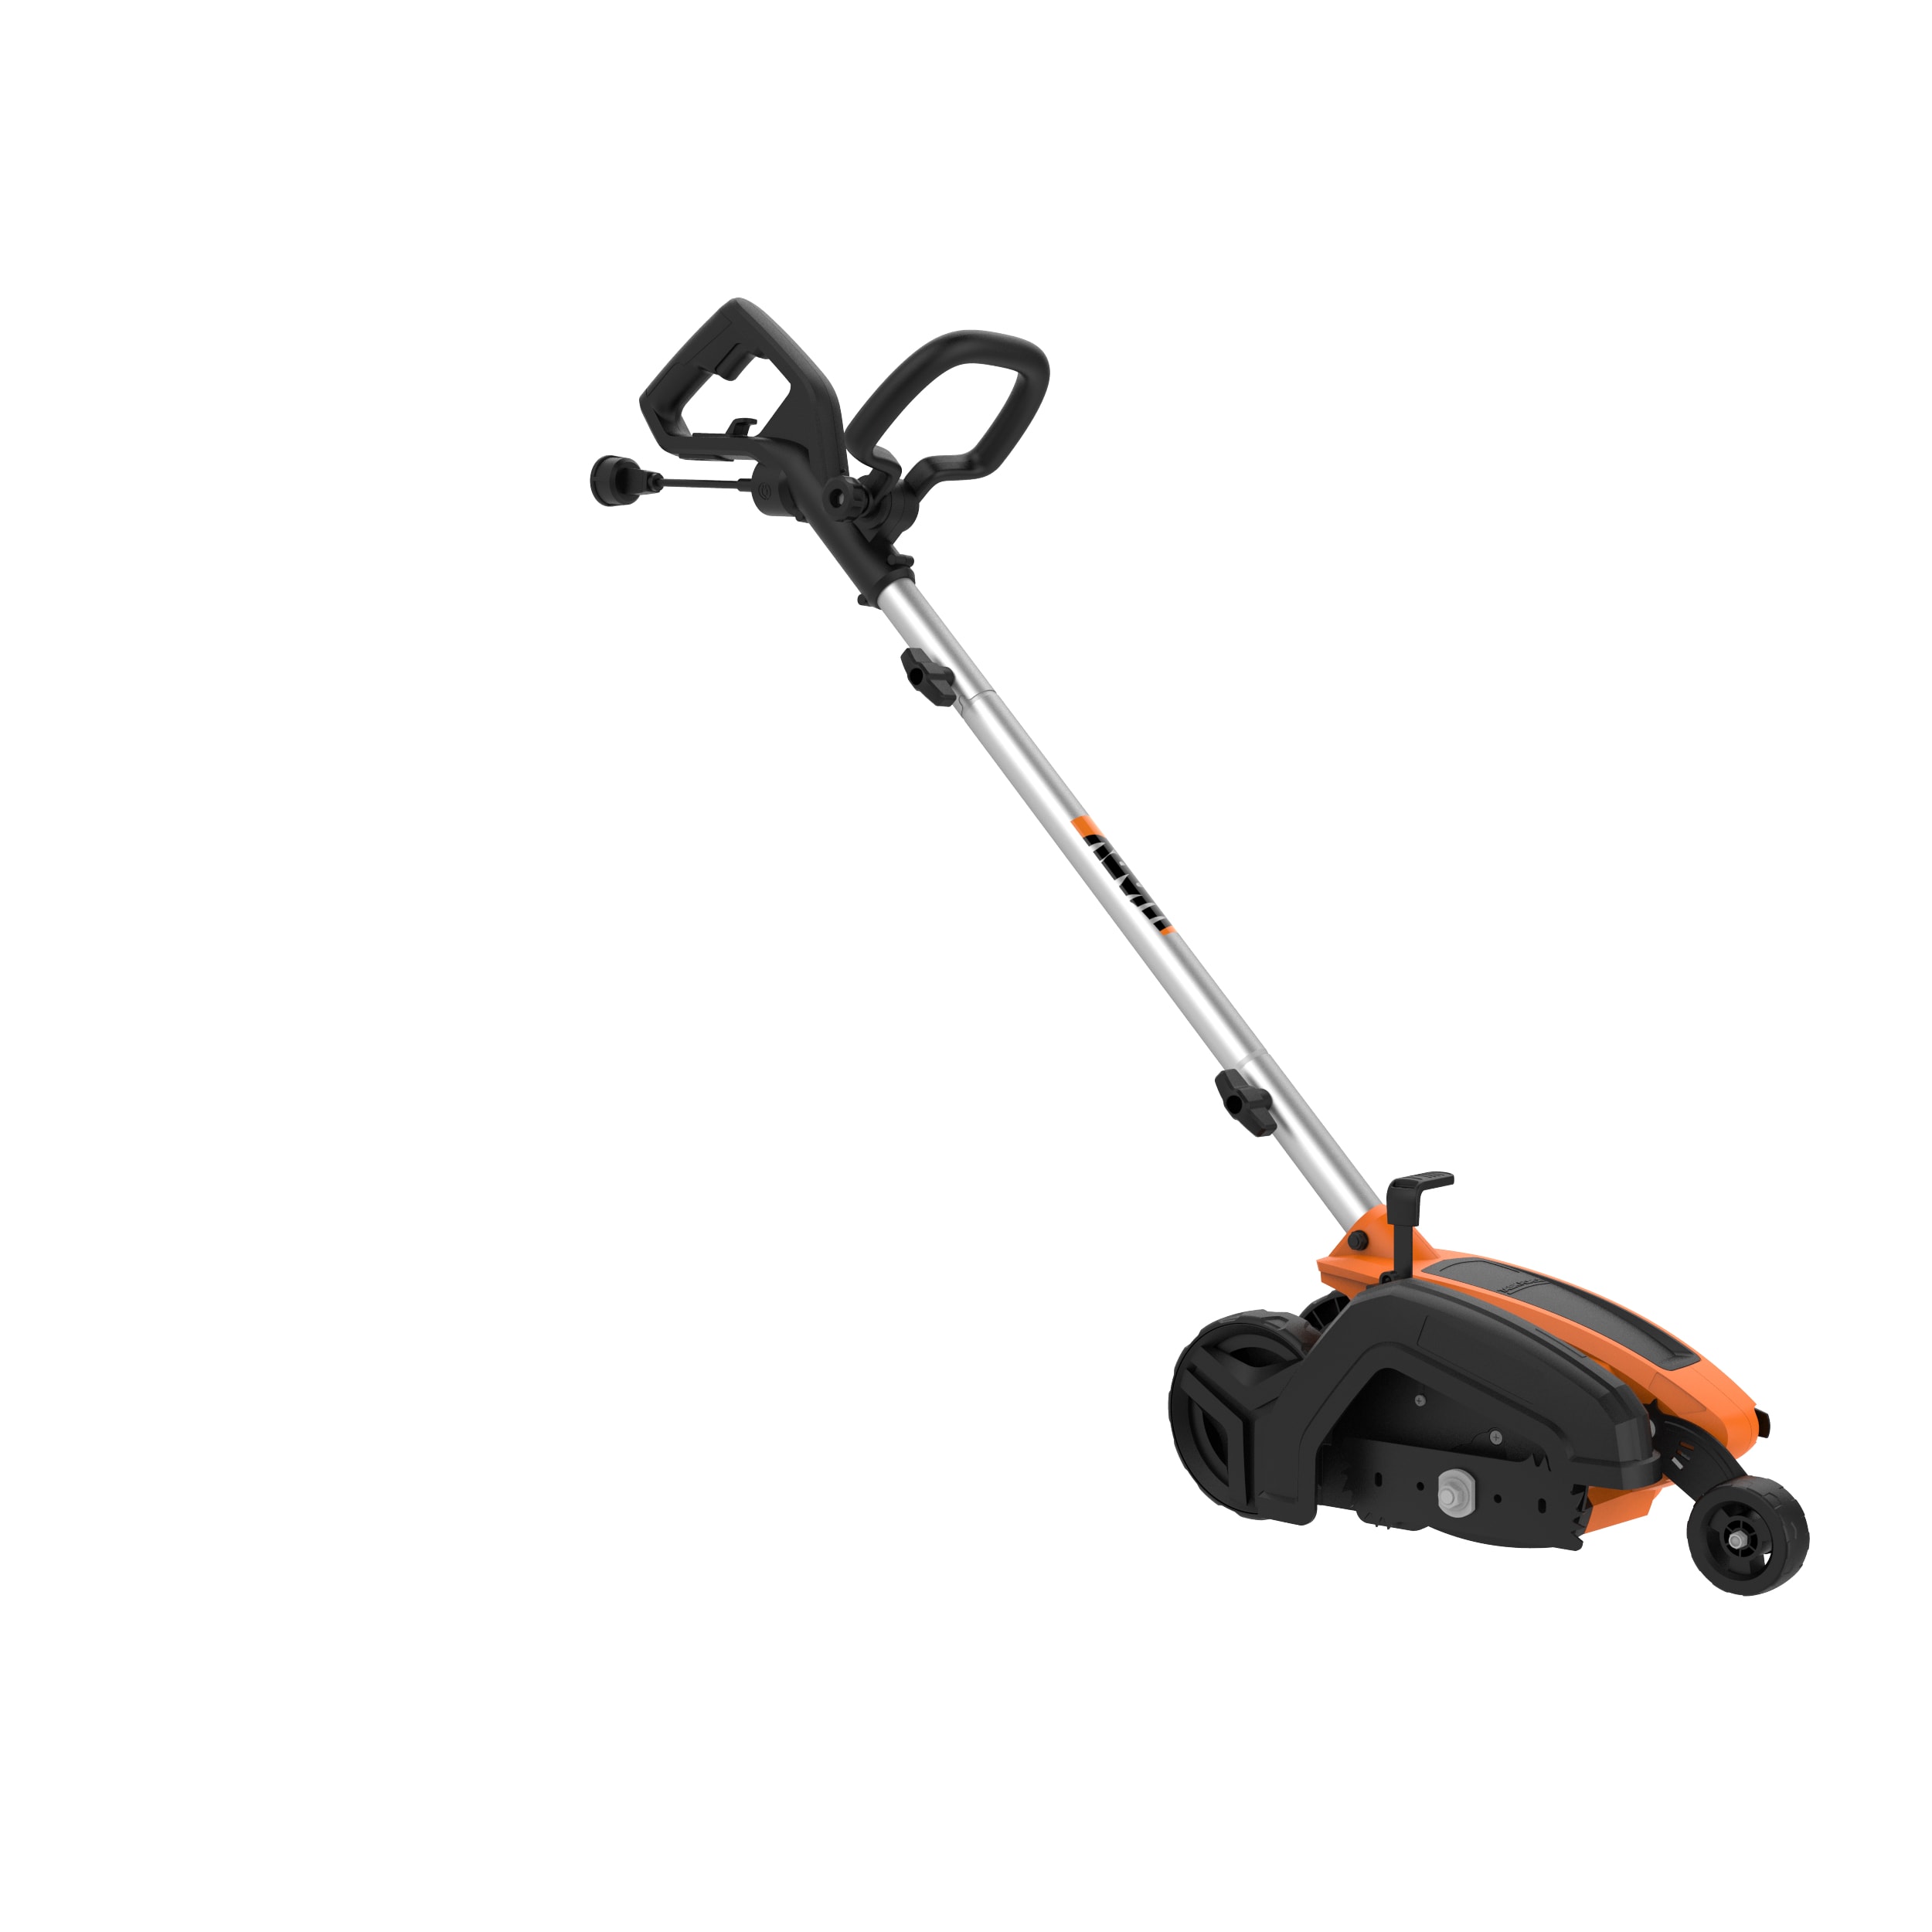 Image of WORX WG896 12 Amp 7.5" Electric Lawn Edger & Trencher